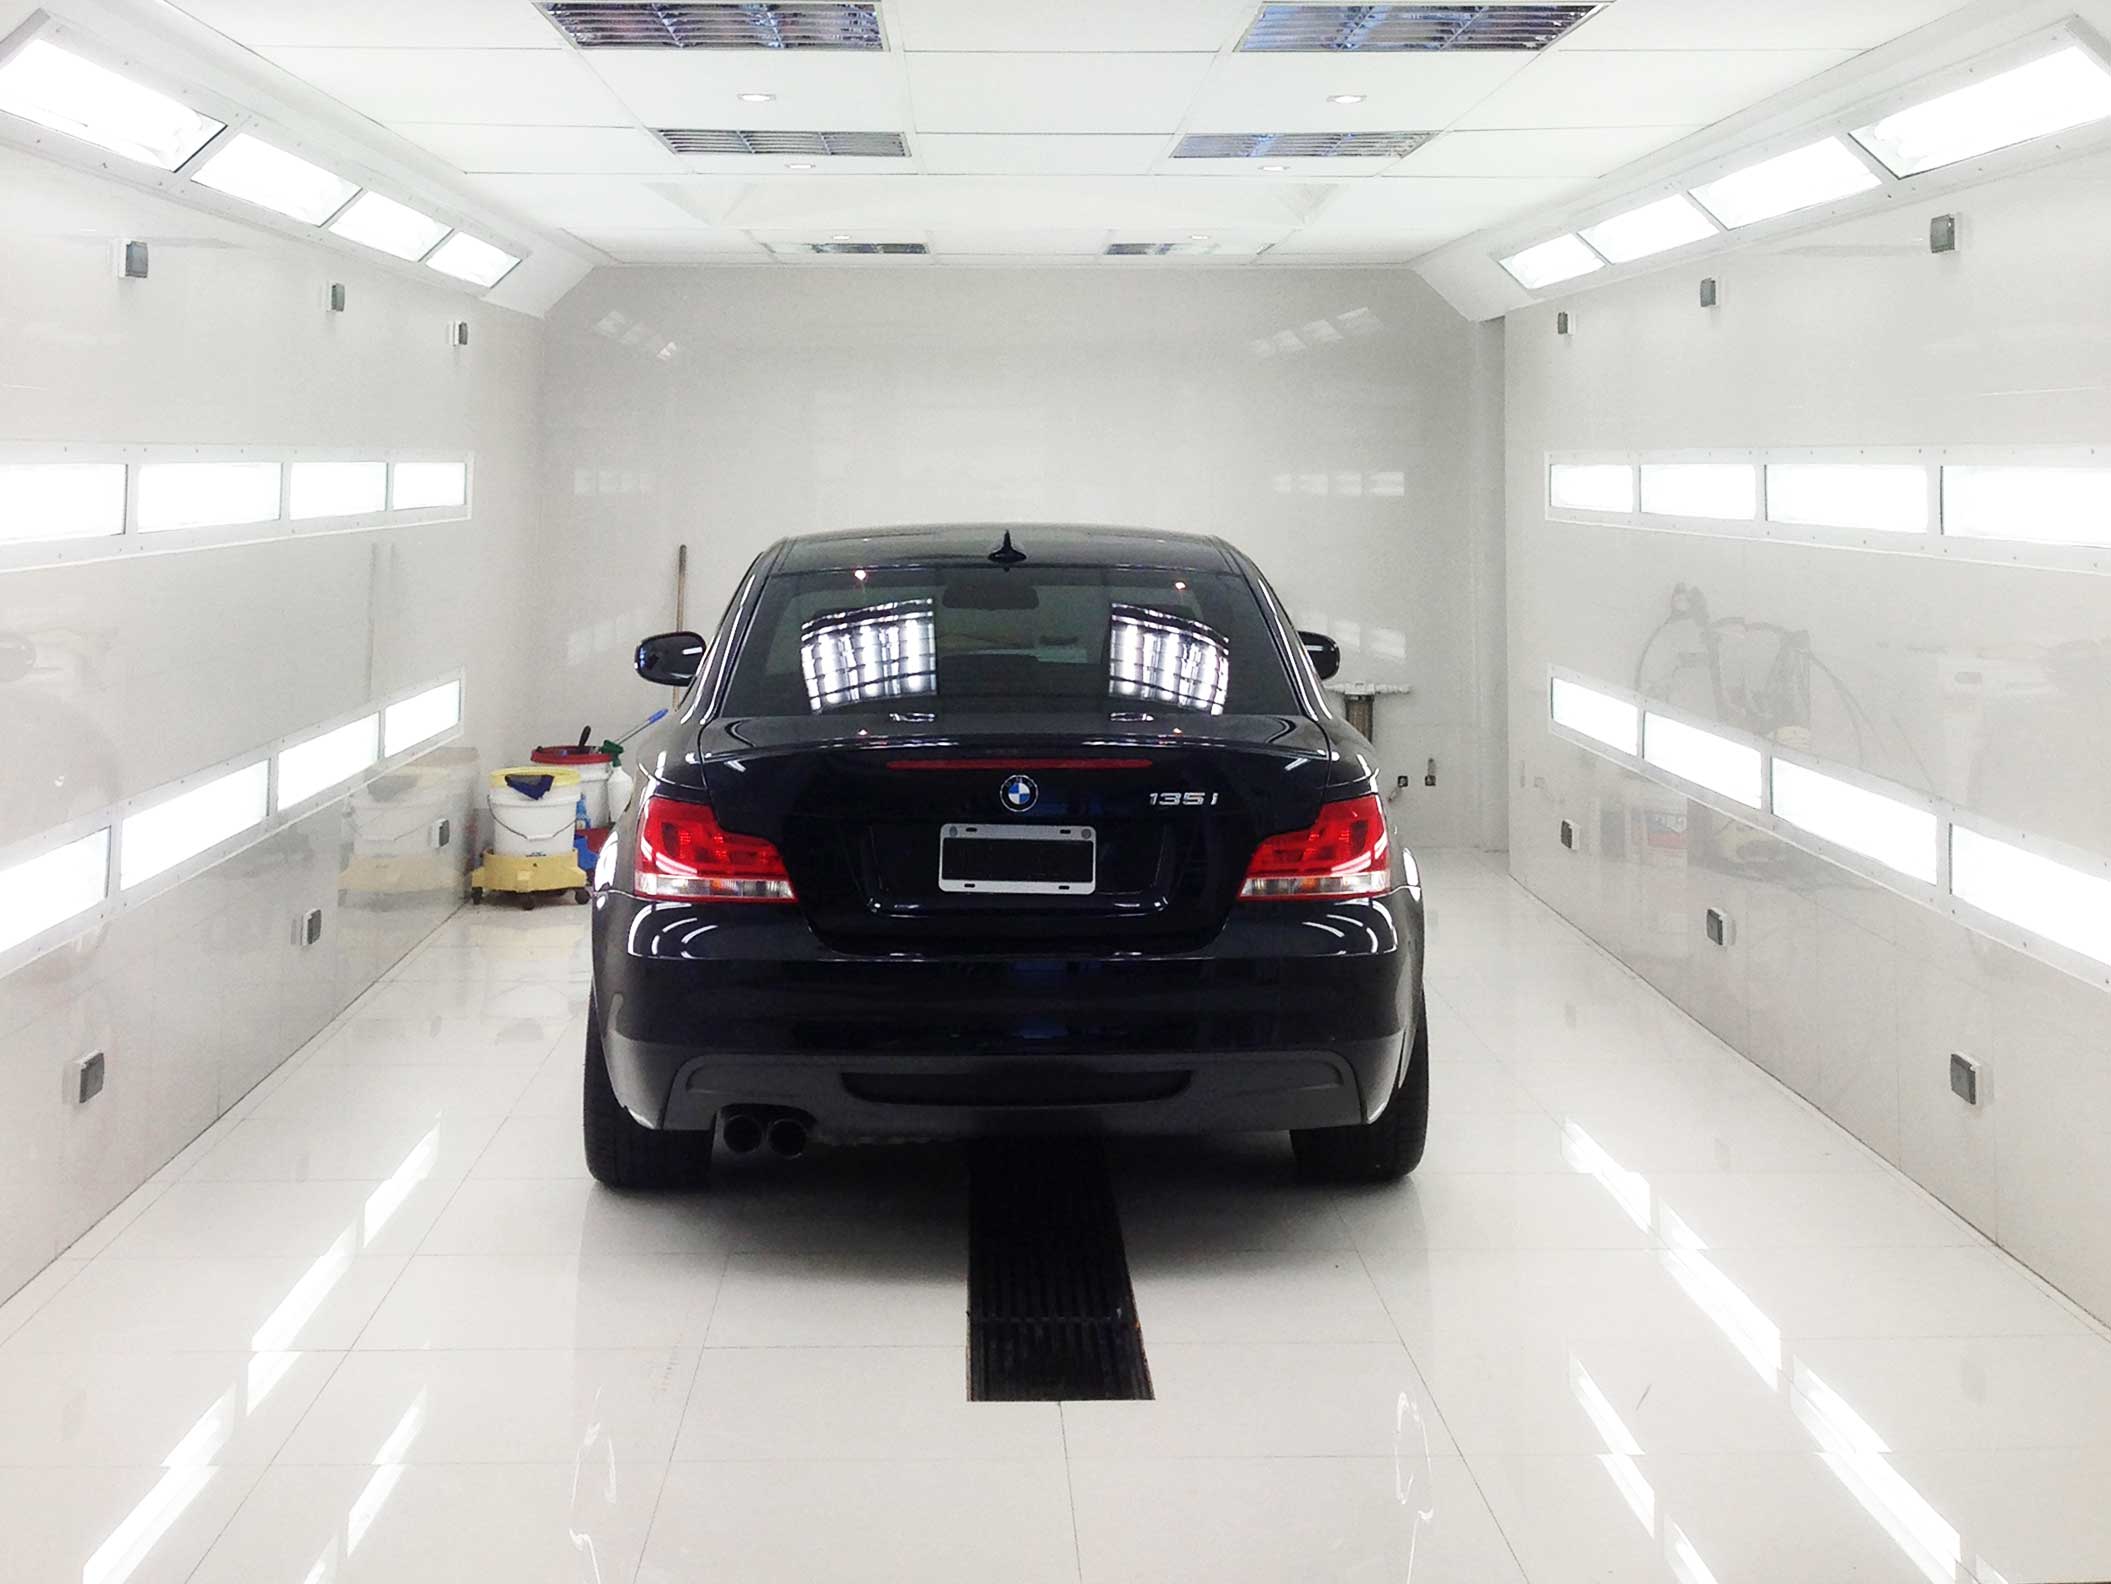 Back-view of highly glossy black BMW at the center of brightly lit cabin during restoration process